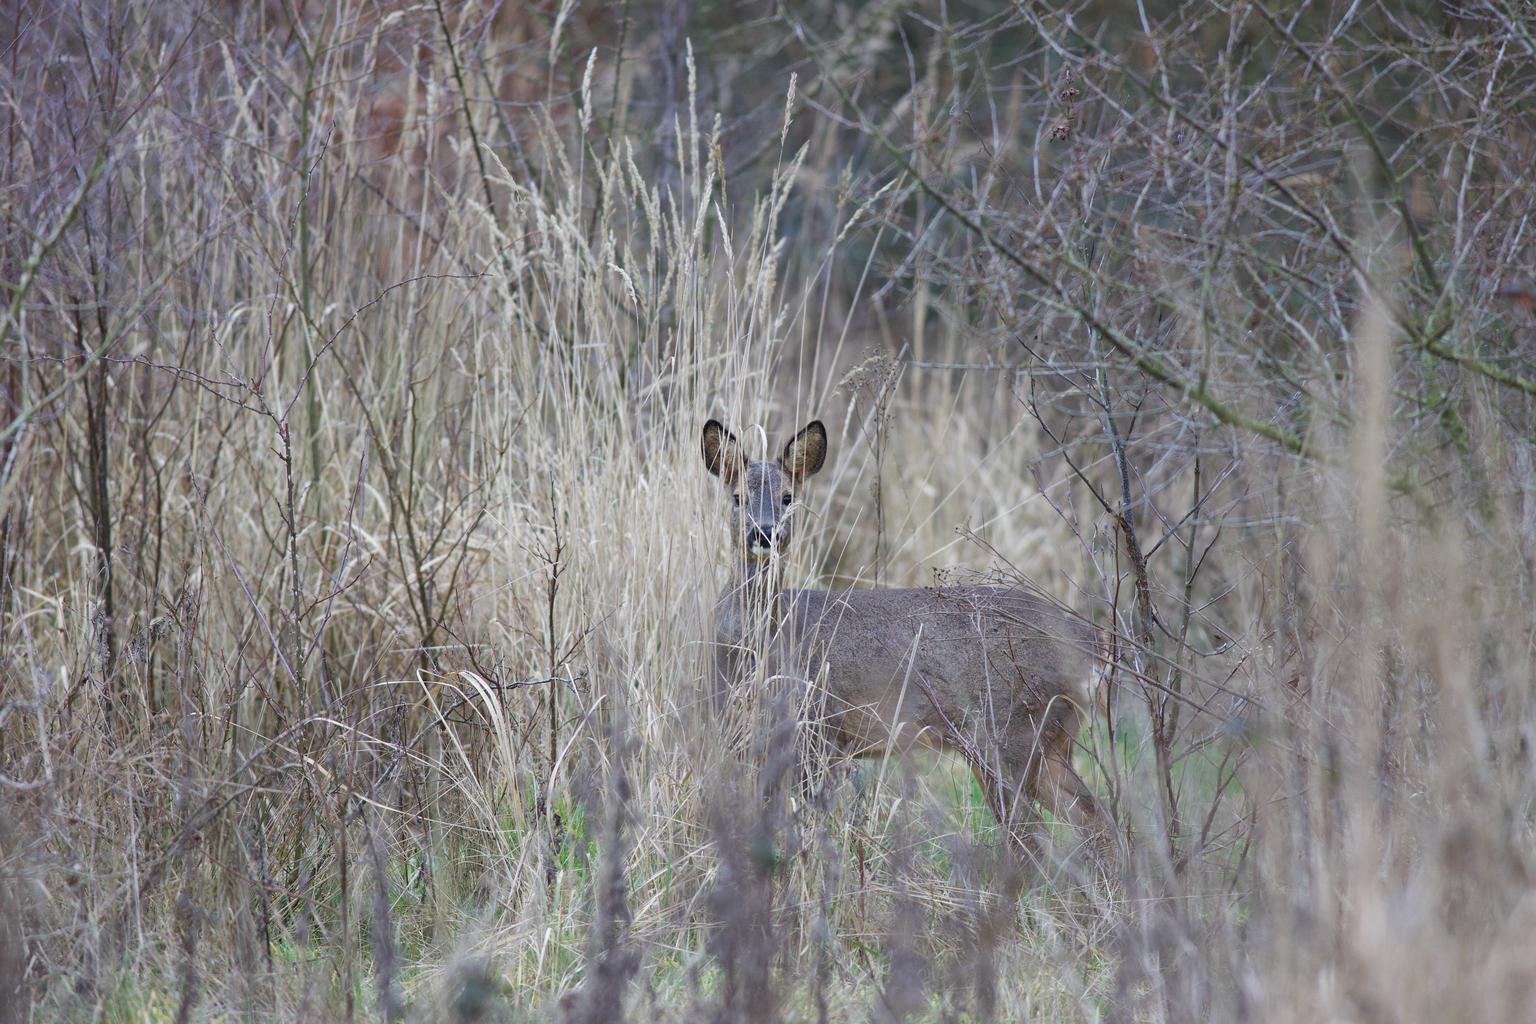 The typical winter look of a roe deer